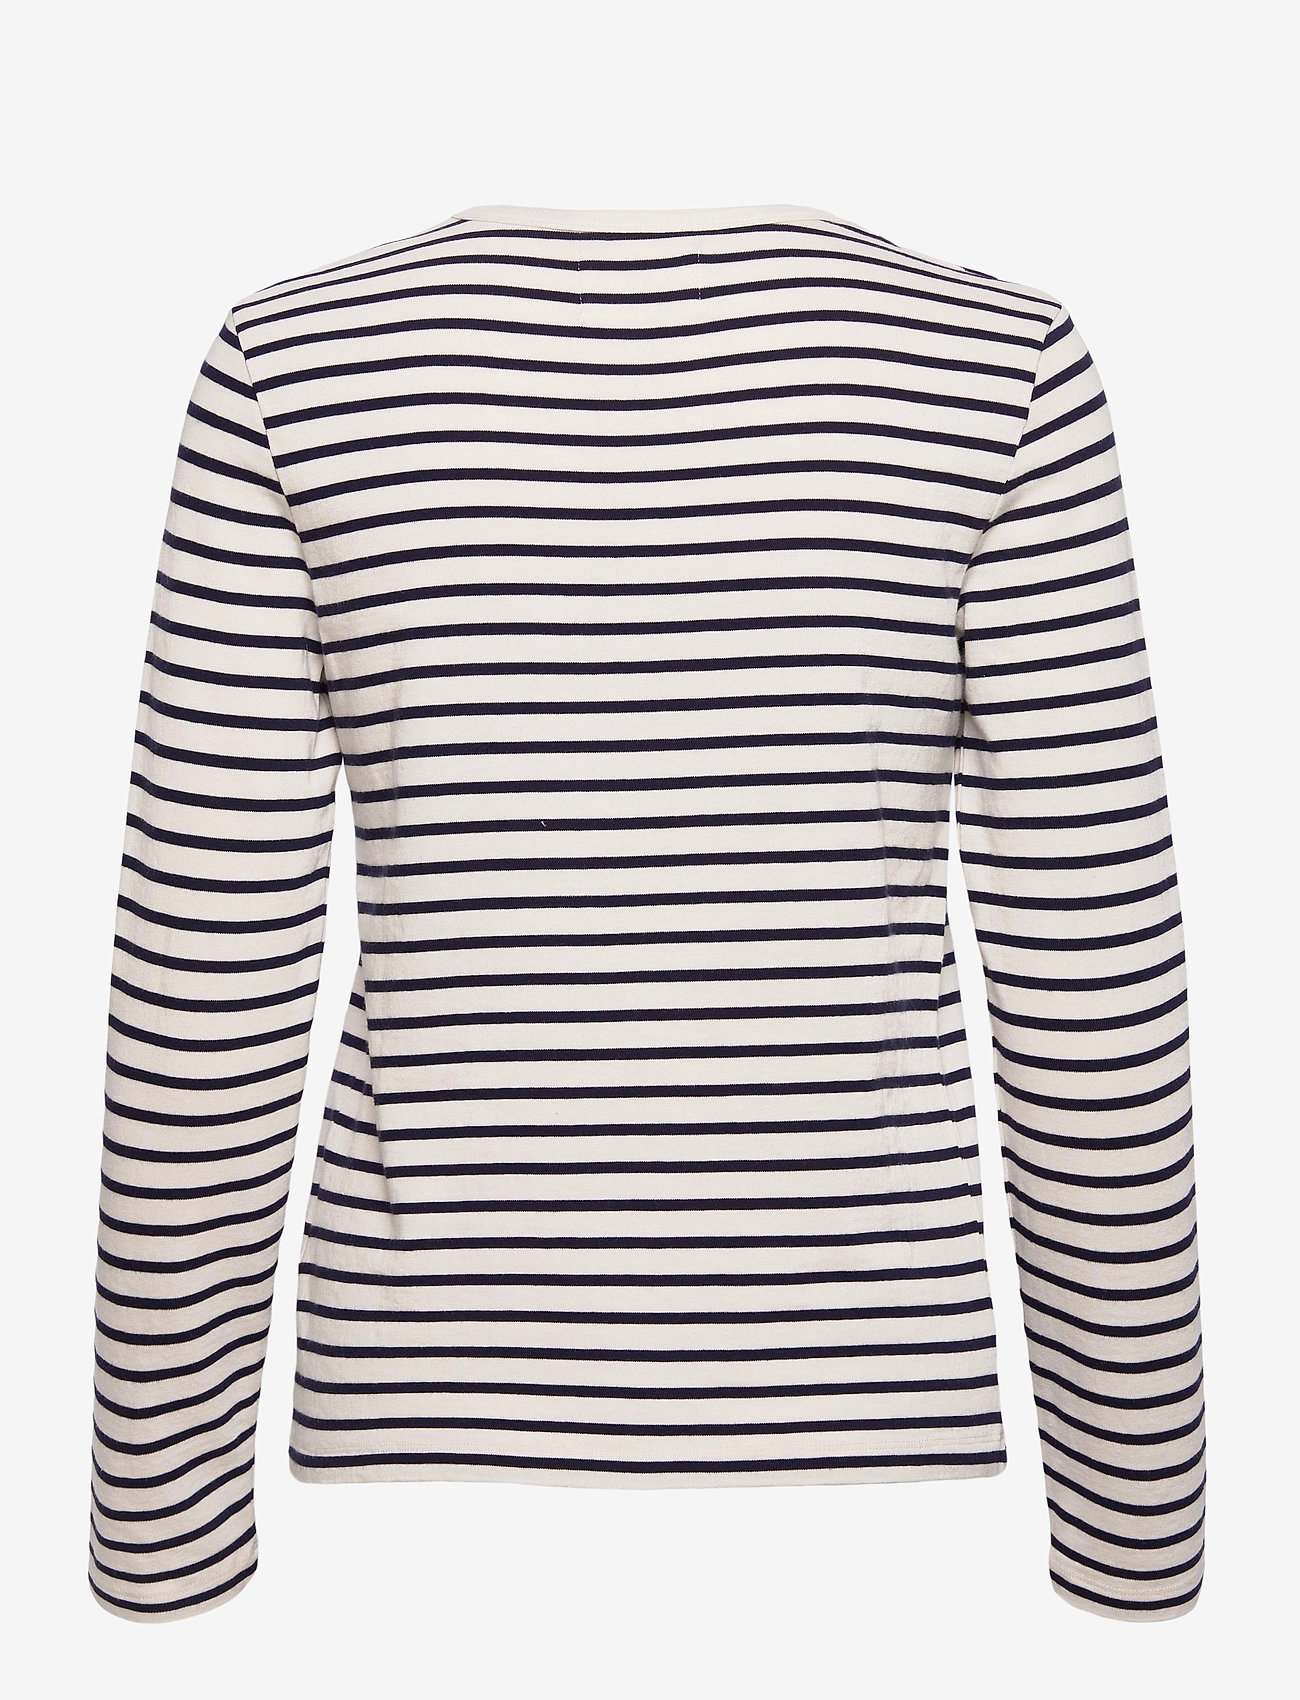 Double A by Wood Wood - Moa stripe long sleeve - langærmede toppe - off-white/navy stripes - 1